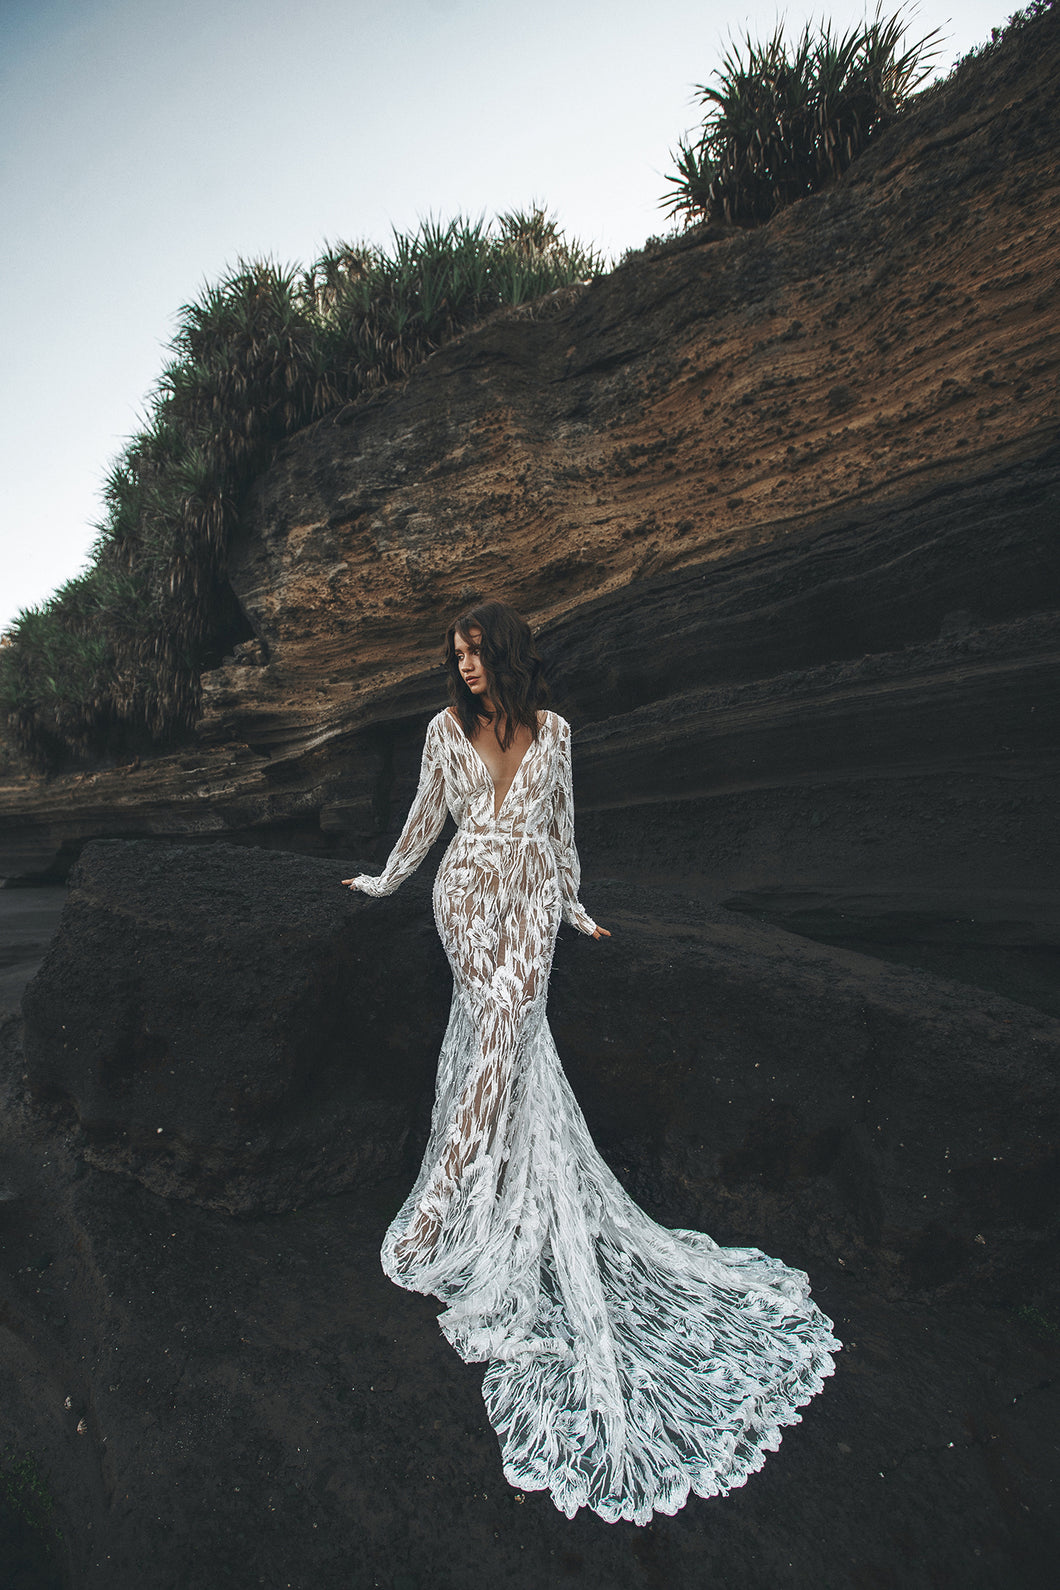 Bride leaning against black rock with long sleeve lace wedding dress fanned in front of her.